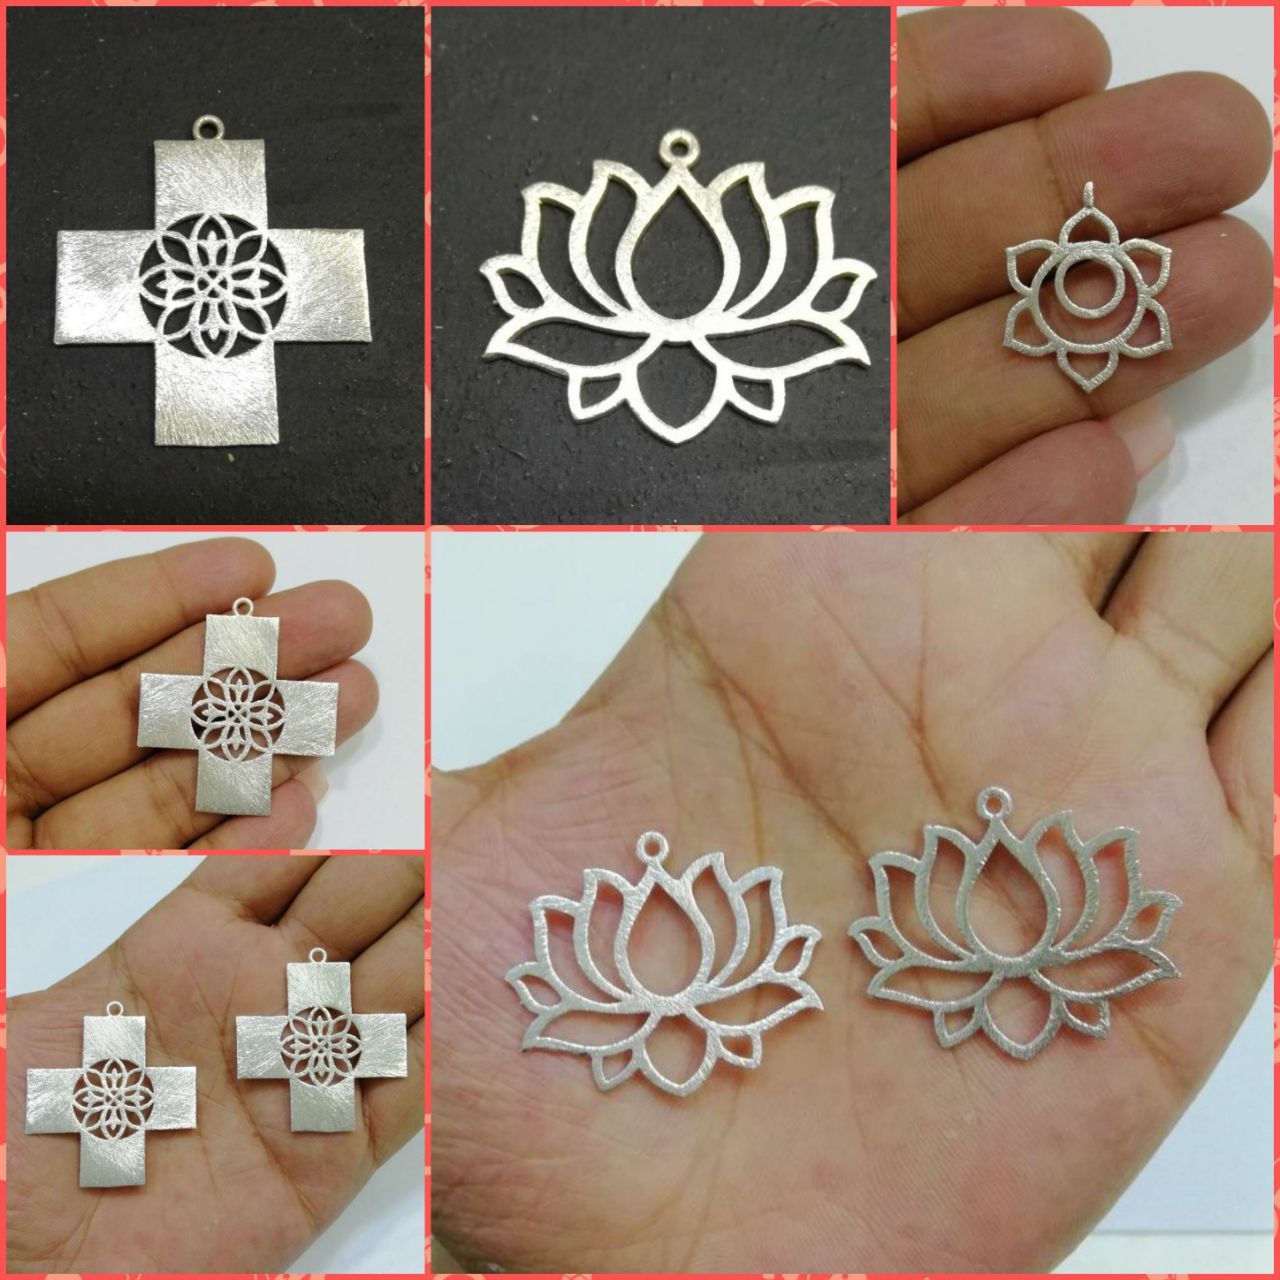 Silver Plated Lotus Shape Charm Pendant - Jewelry Finding Charms For Earring